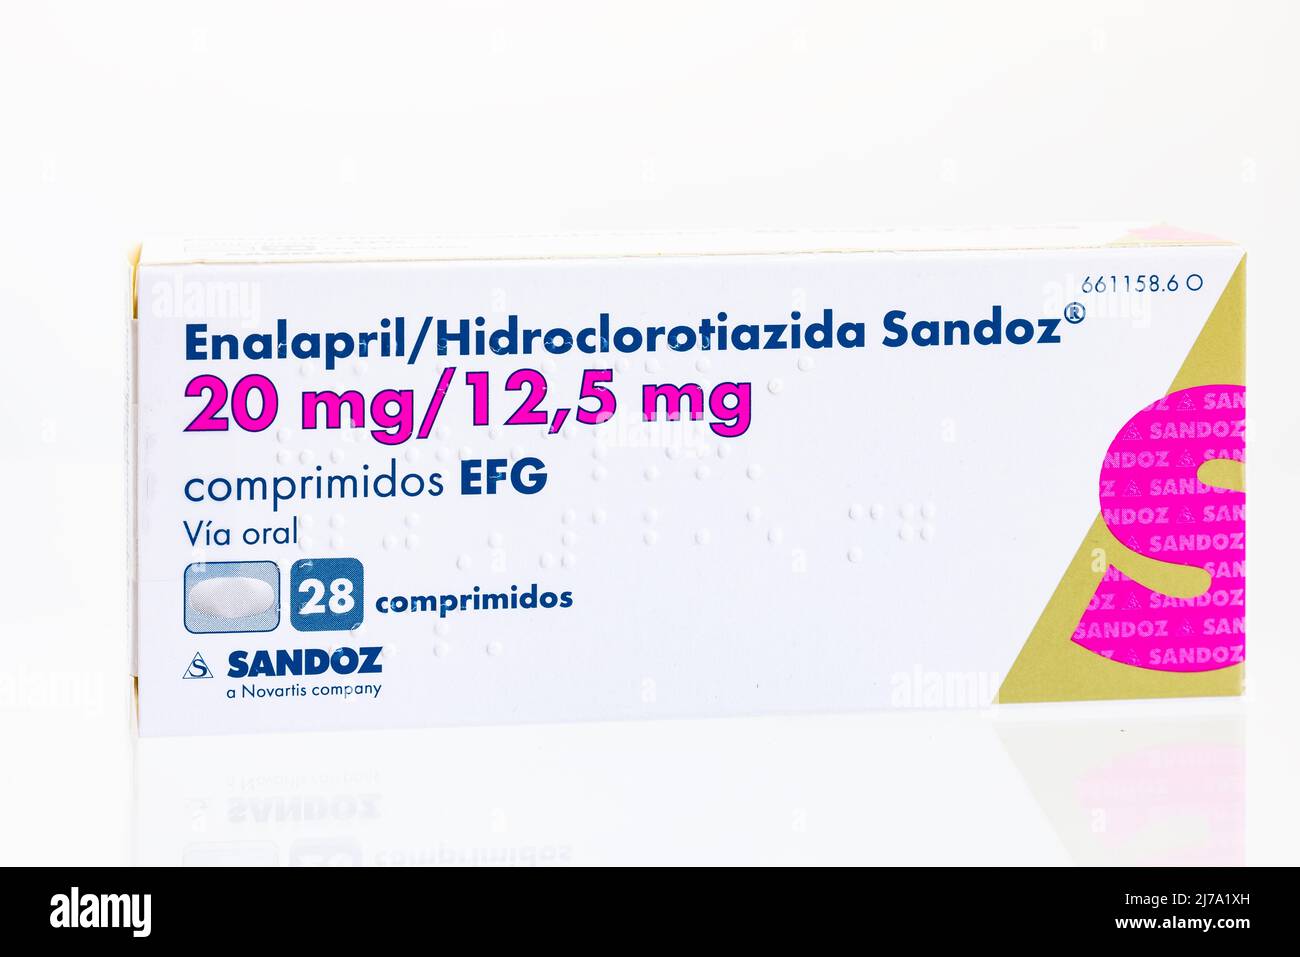 Huelva, Spain - May 07, 2022: Box of a combination of Enalapril Maleate and Hydrochlorothiazide, Treatment of essential hypertension. Stock Photo